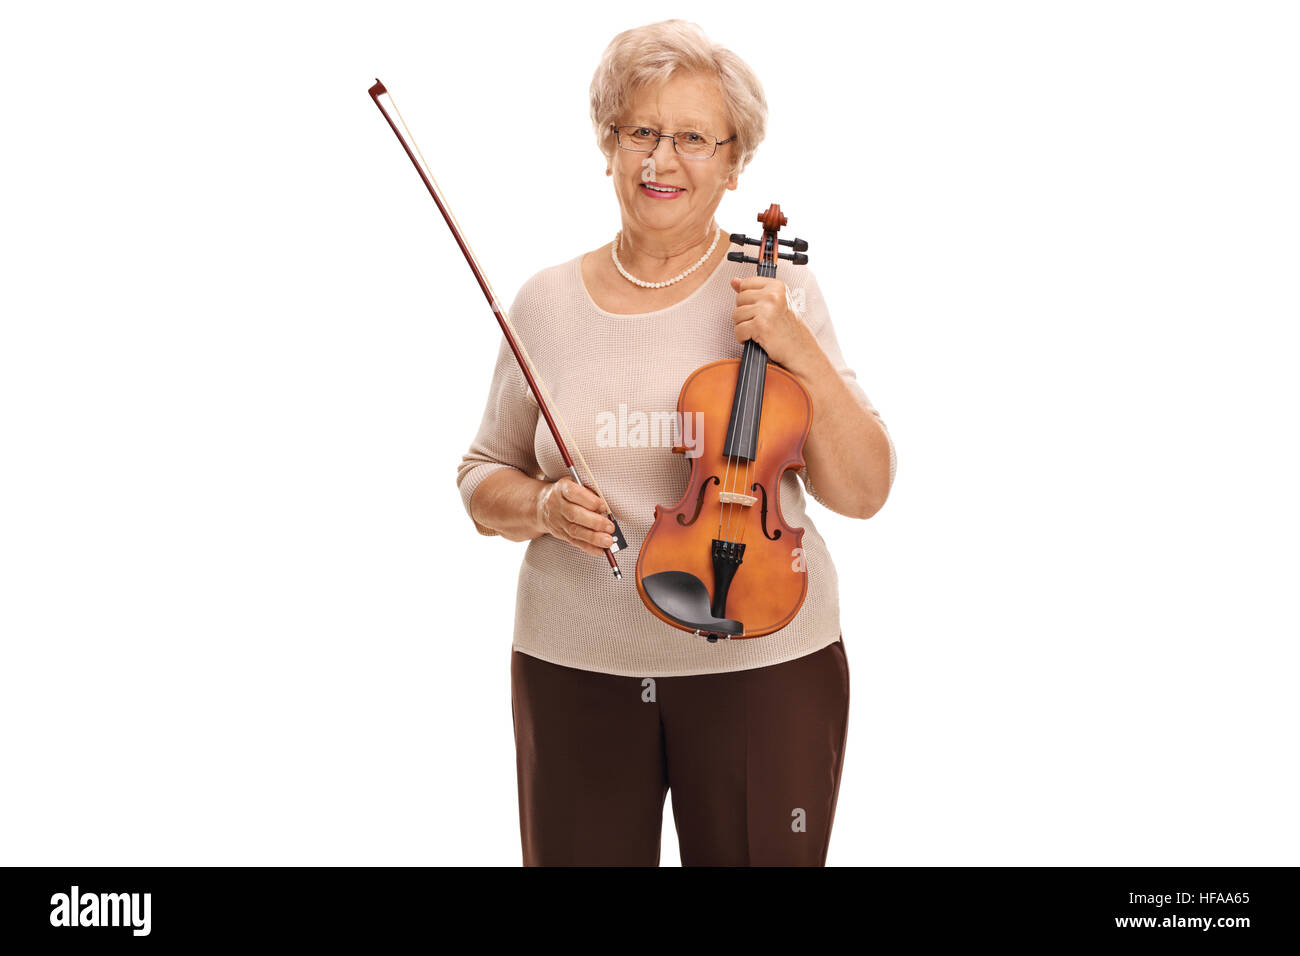 Elderly woman holding a violin and a bow isolated on white background Stock Photo